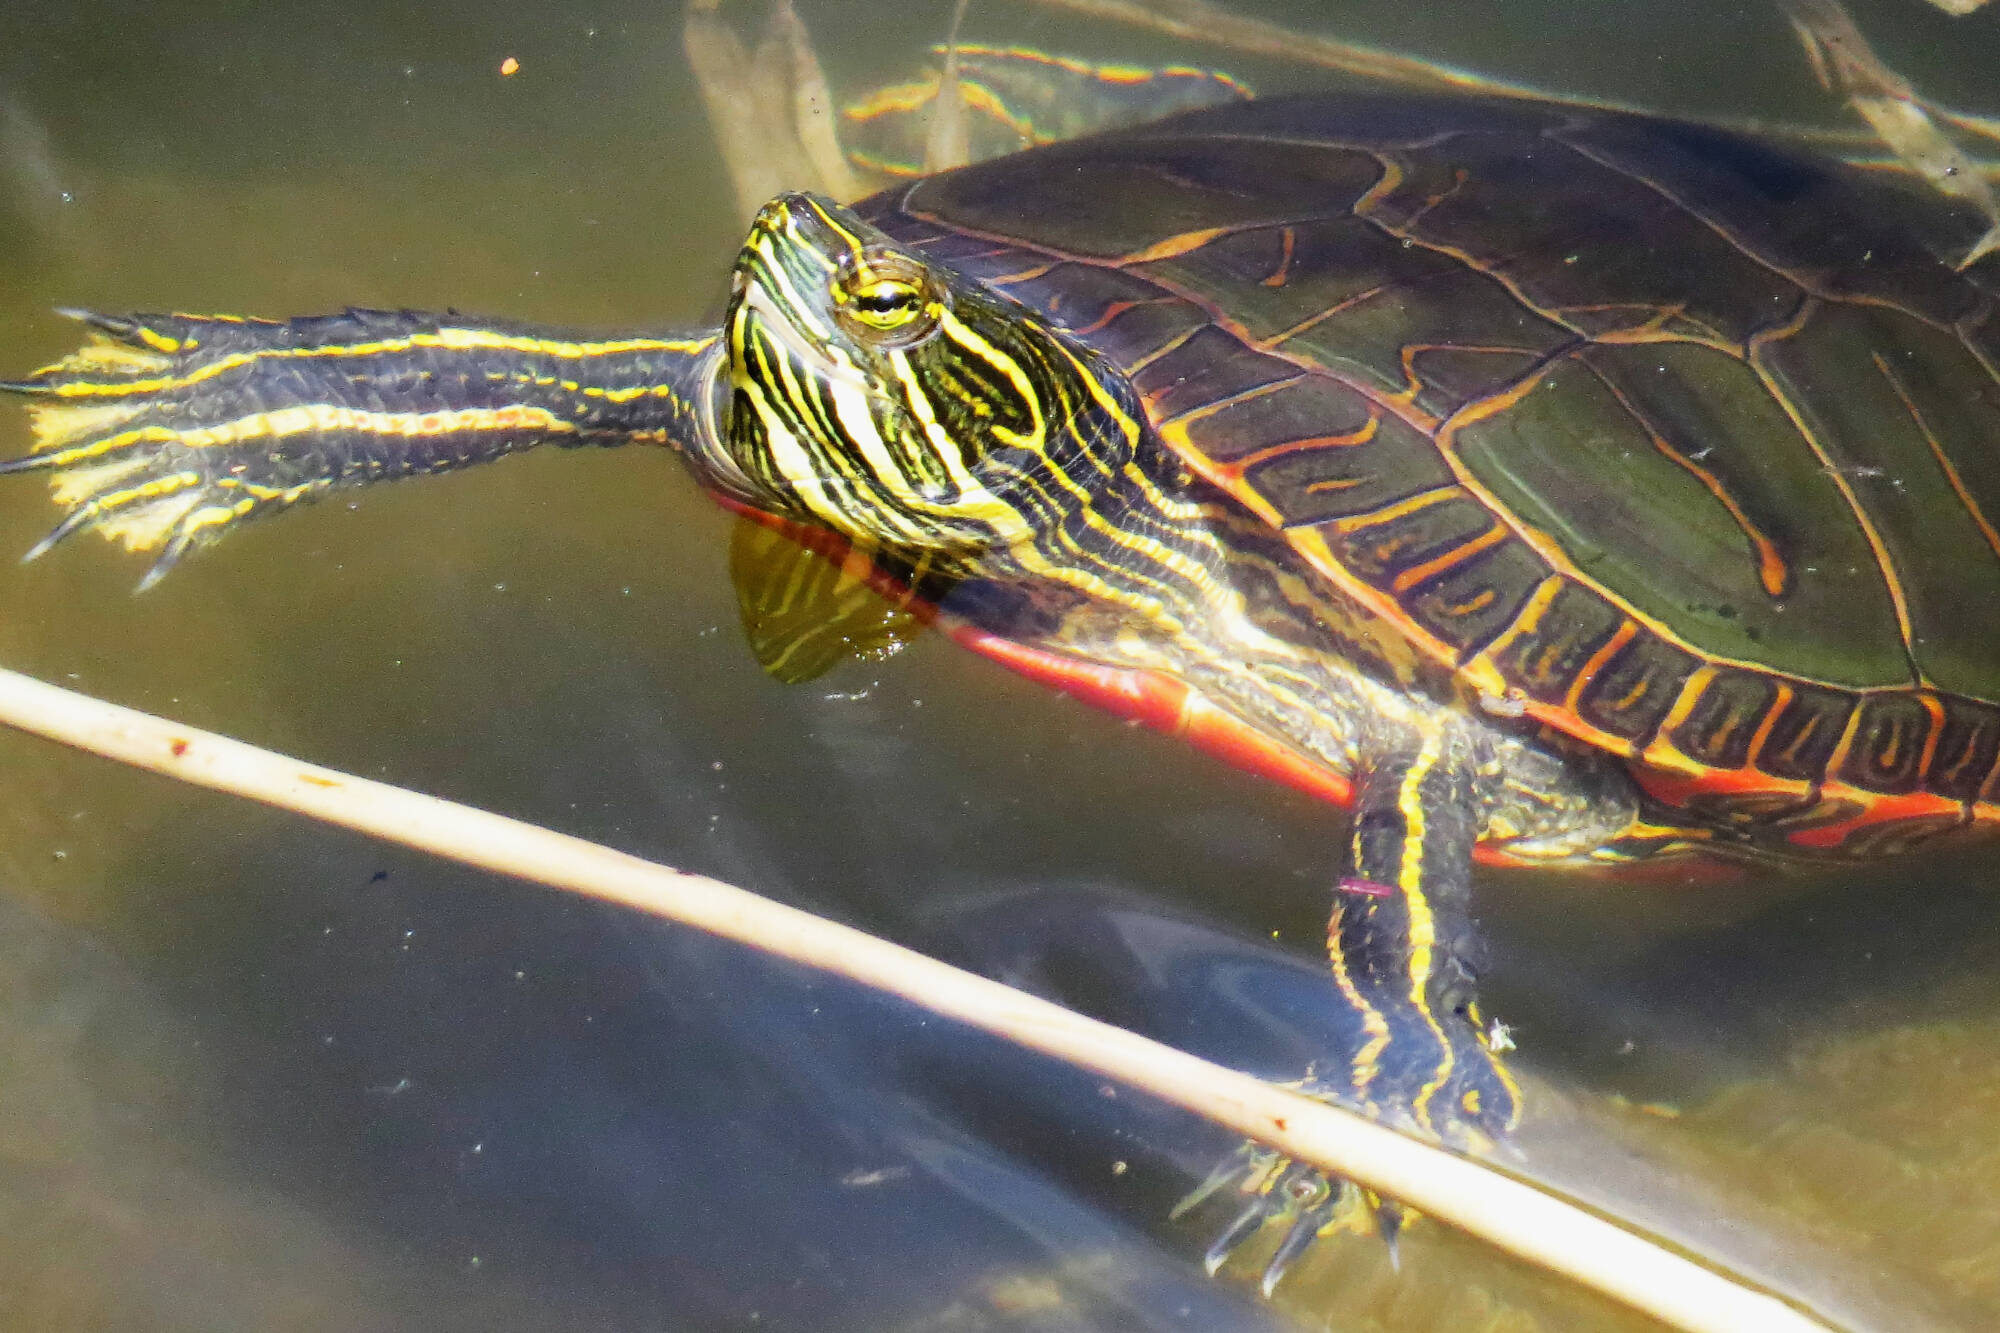 Western painted turtles get their name from their western distribution and their finely detailed red, yellow and green markings. (John G. Woods photo)